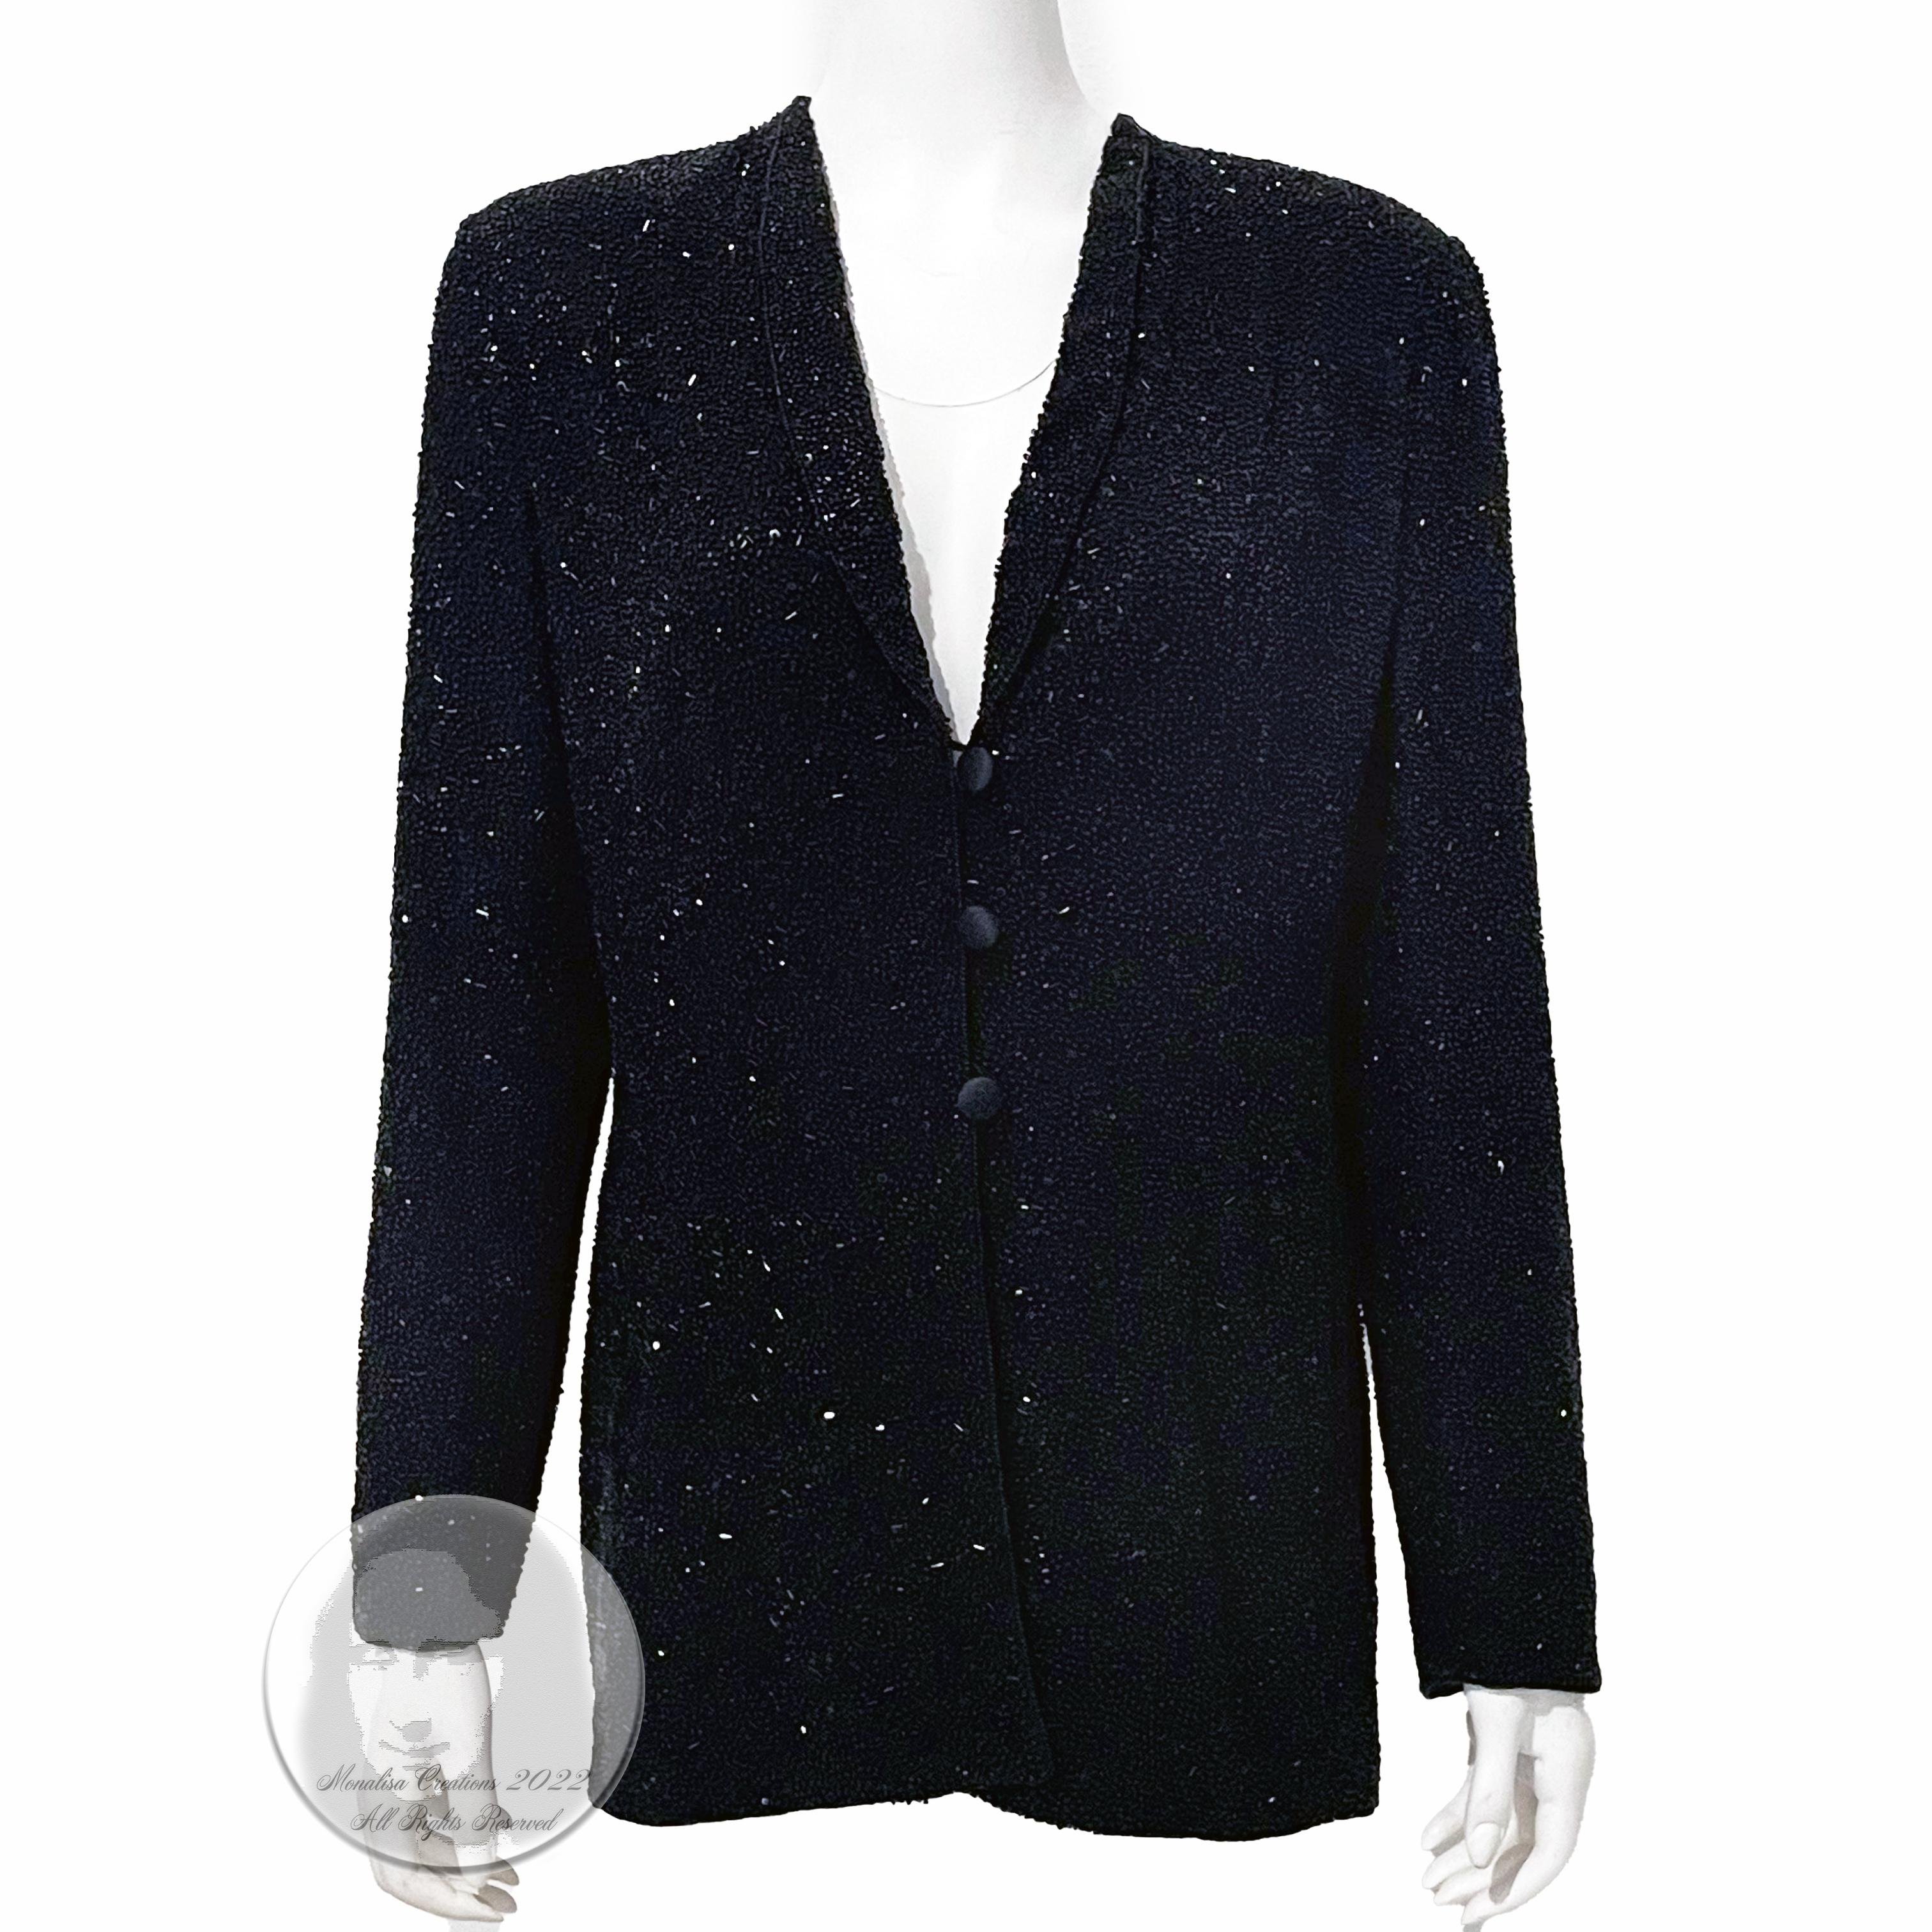 Authentic, preowned, vintage jacket, made by Escada Couture, most likely in the mid 90s.  Made from black silk, this tuxedo-style jacket is covered in TONS of black jet beads that sparkle and twinkle in light!  It fastens with silk-covered buttons